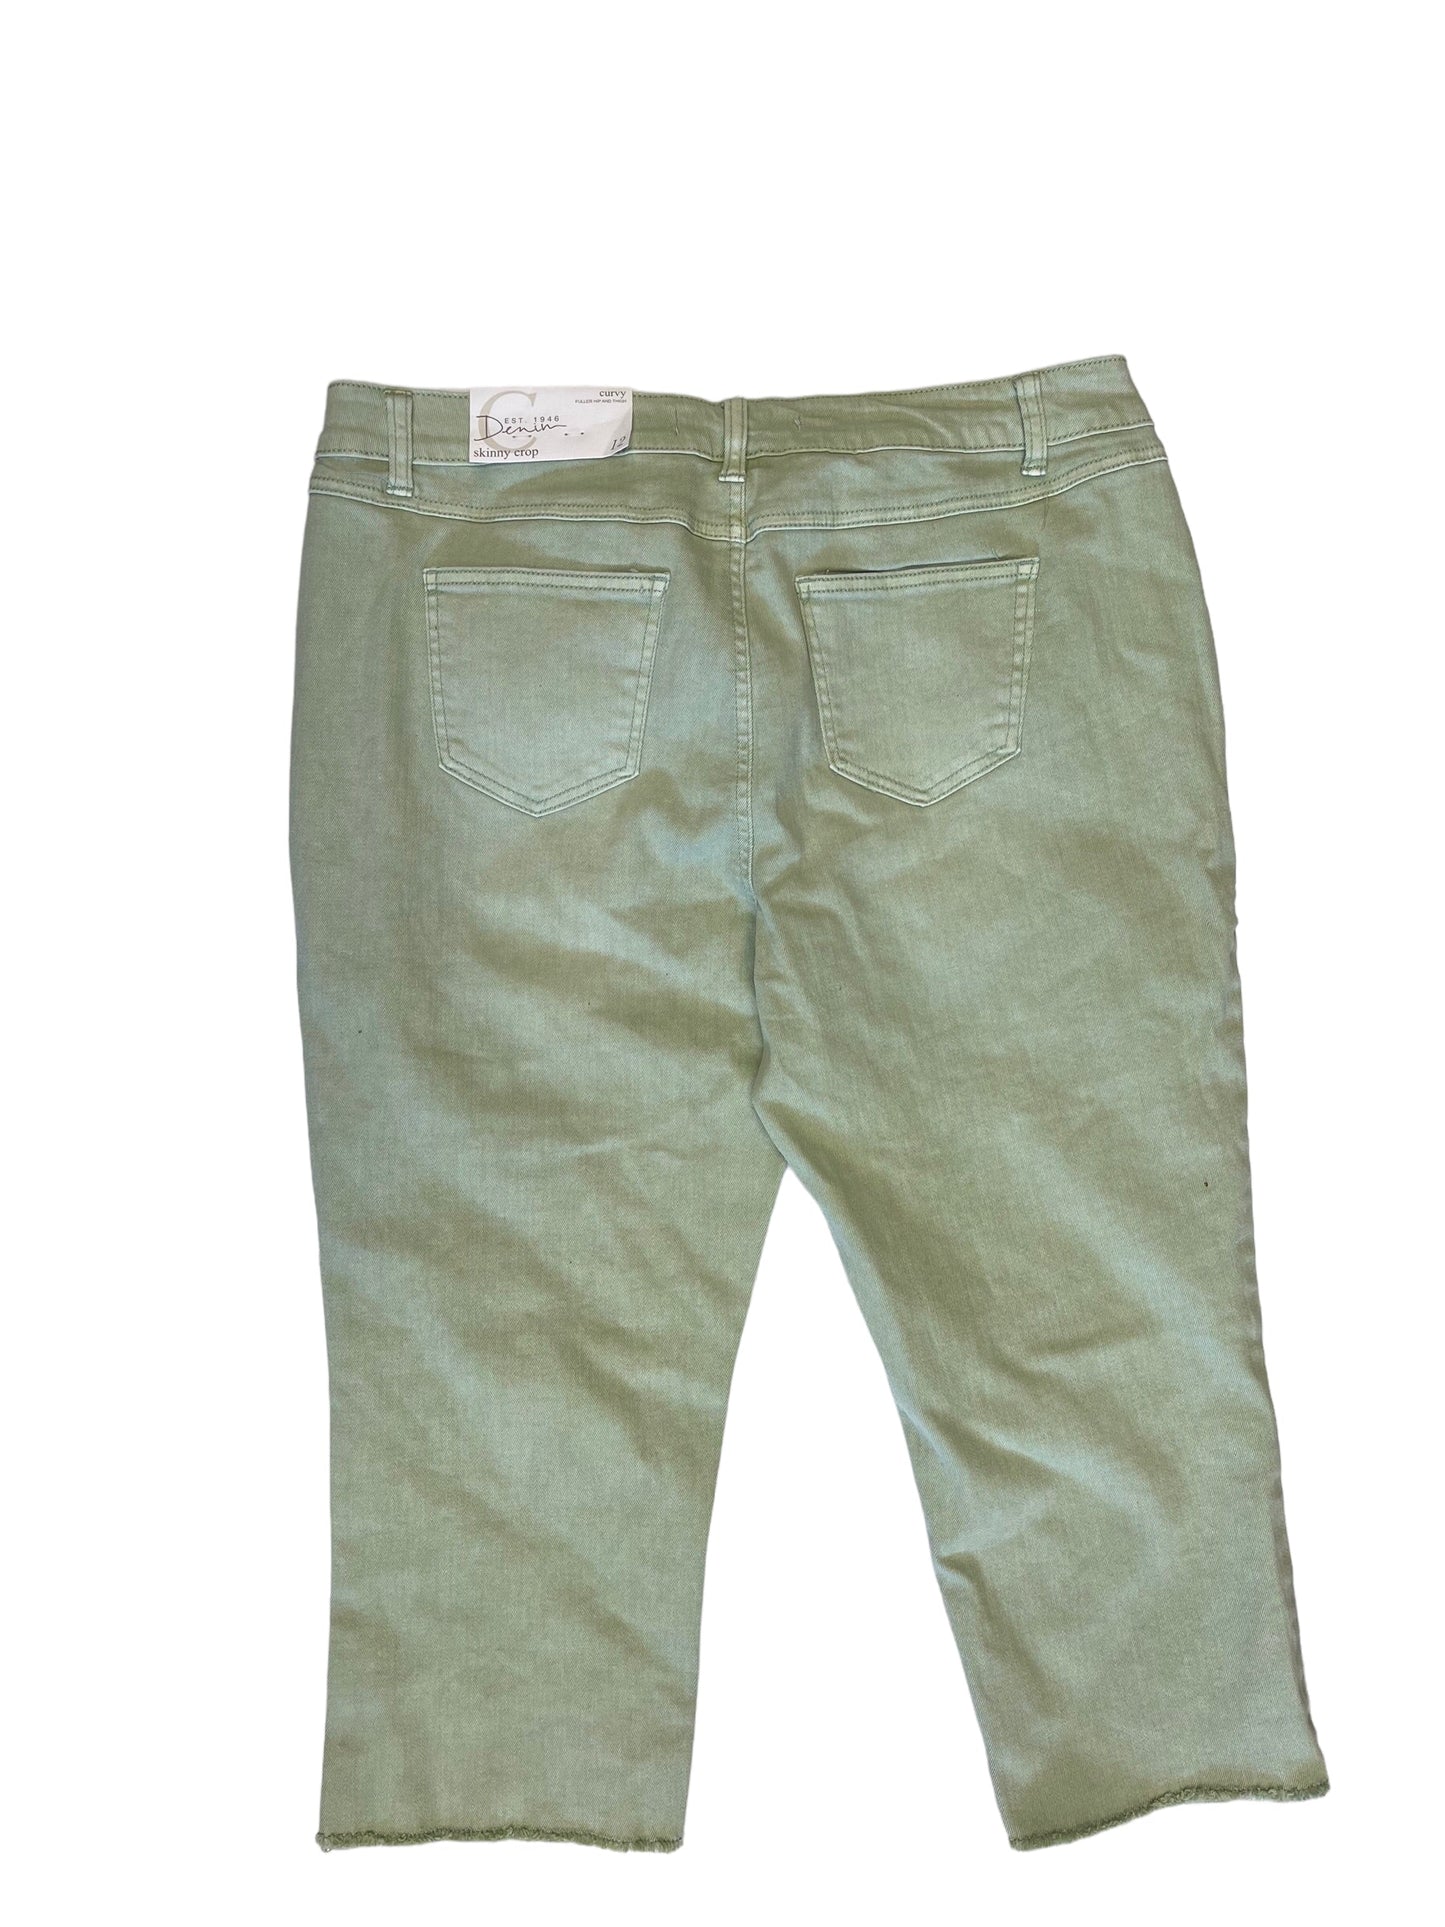 Capris By Cato  Size: 12